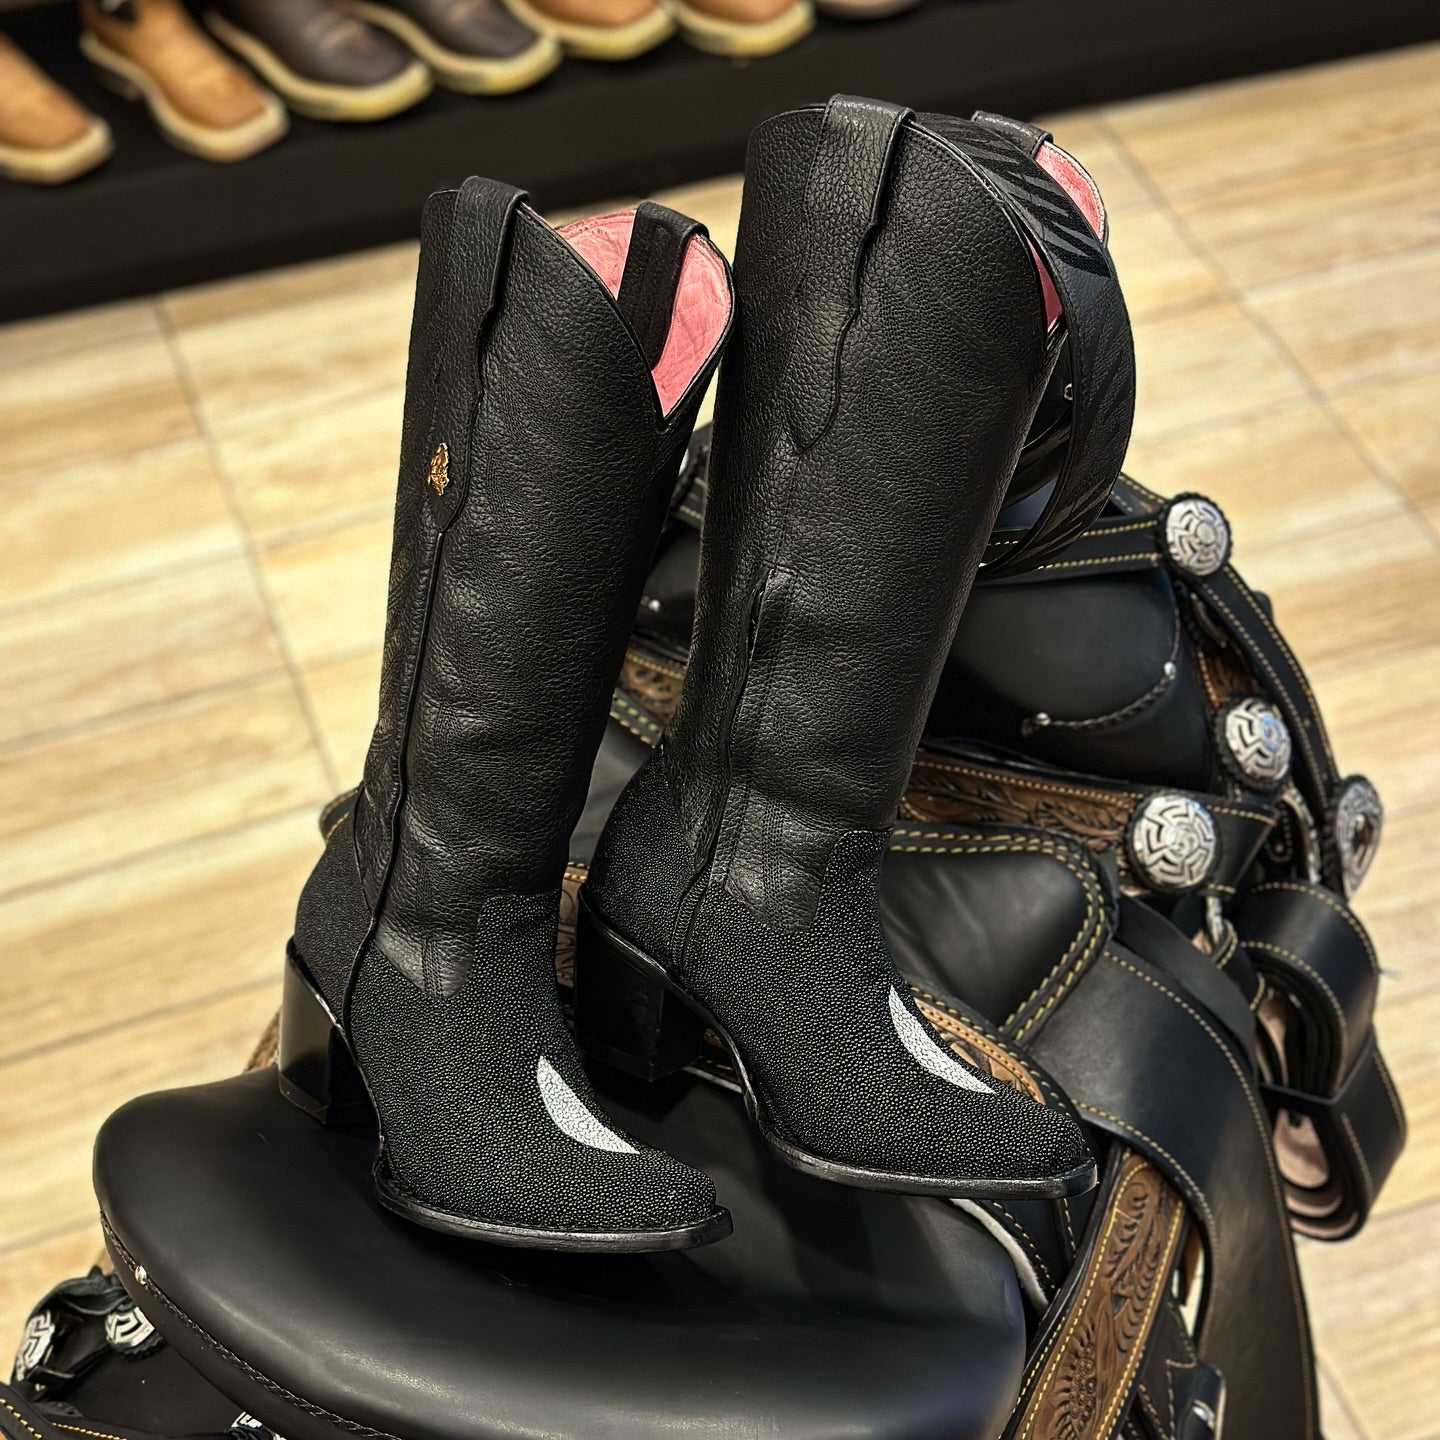 Women'S Vintage Tall Rider Boots